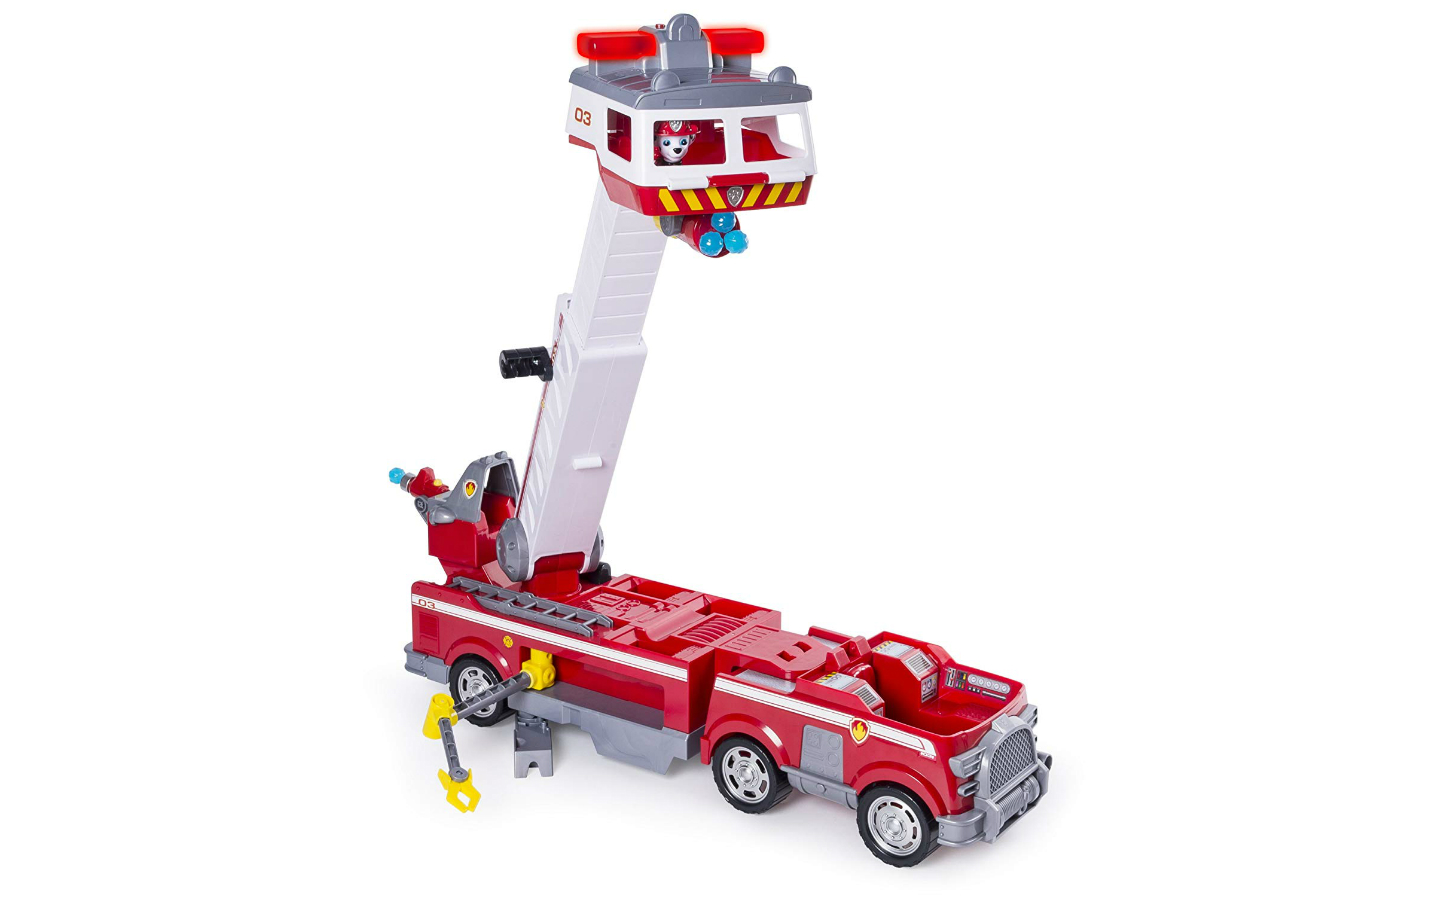 Christmas gift guide: PAW Patrol Ultimate Rescue Fire Truck